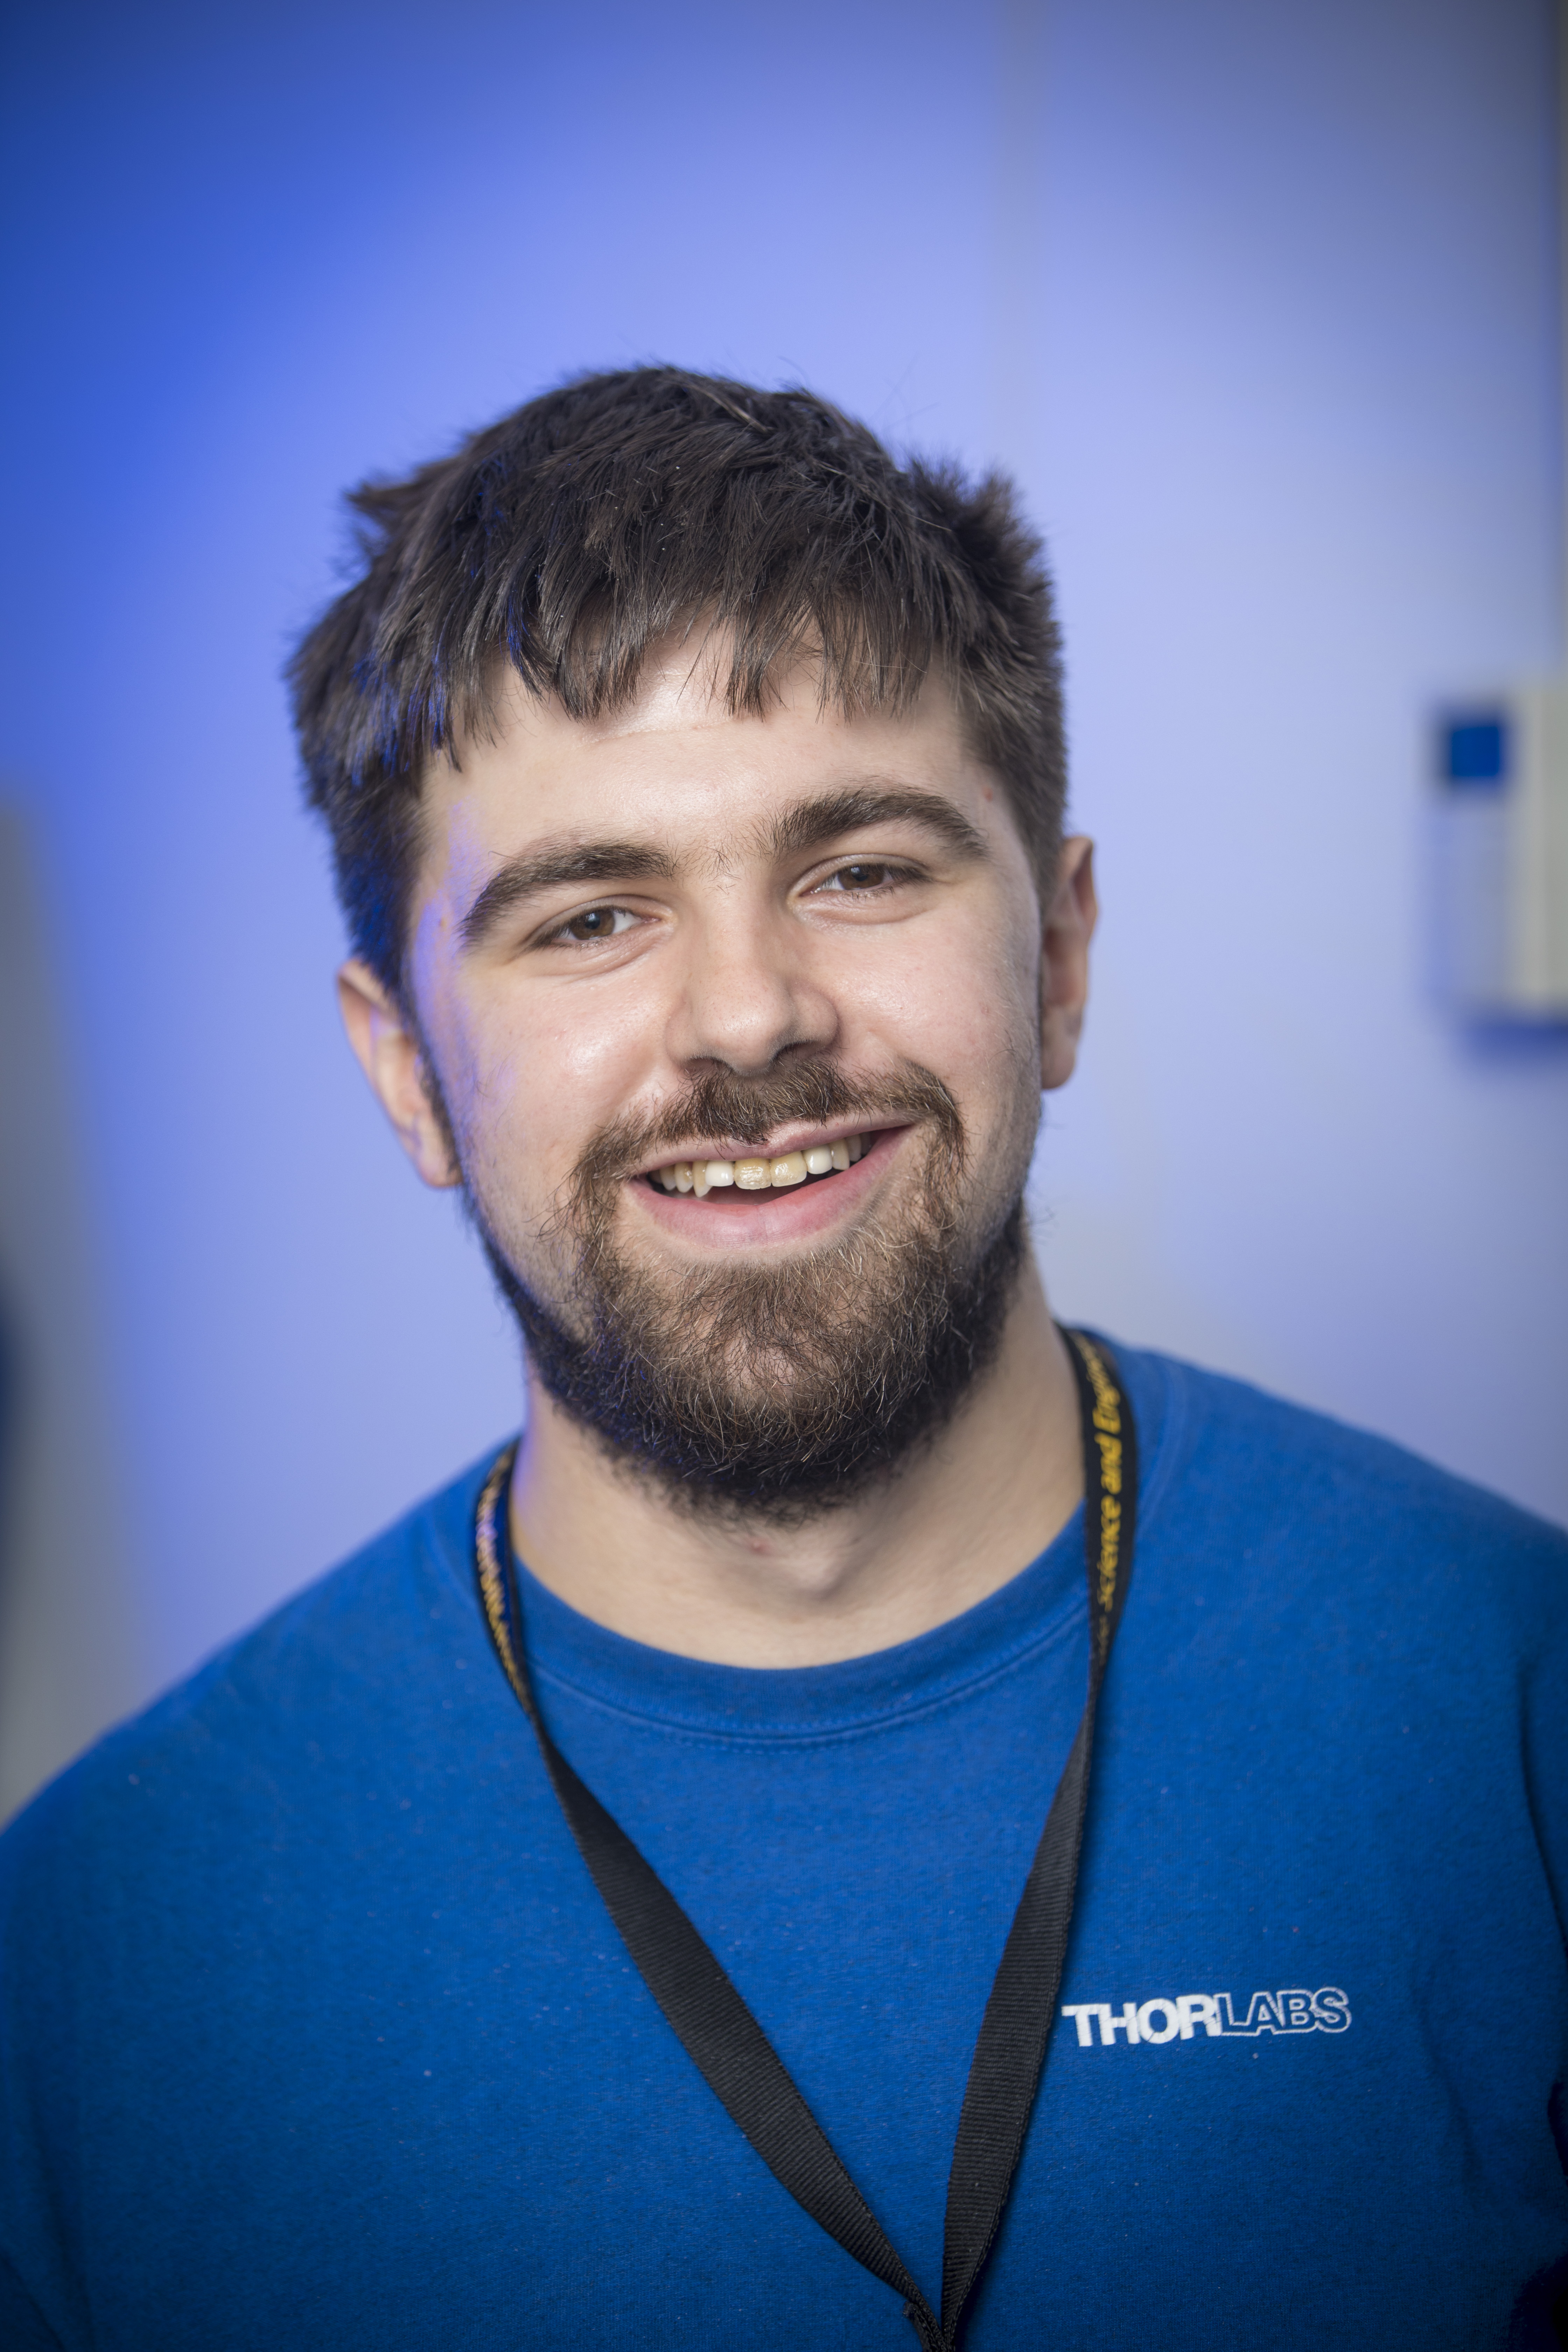 Dr. Tom Folland (Postdoctoral Fellow).  Joined the Caldwell Lab at the very beginning, was critical to getting the lab setup and initial results getting accumulated. He comes to us from University of Manchester in the UK, where he did his PhD work on THz quantum cascade lasers.